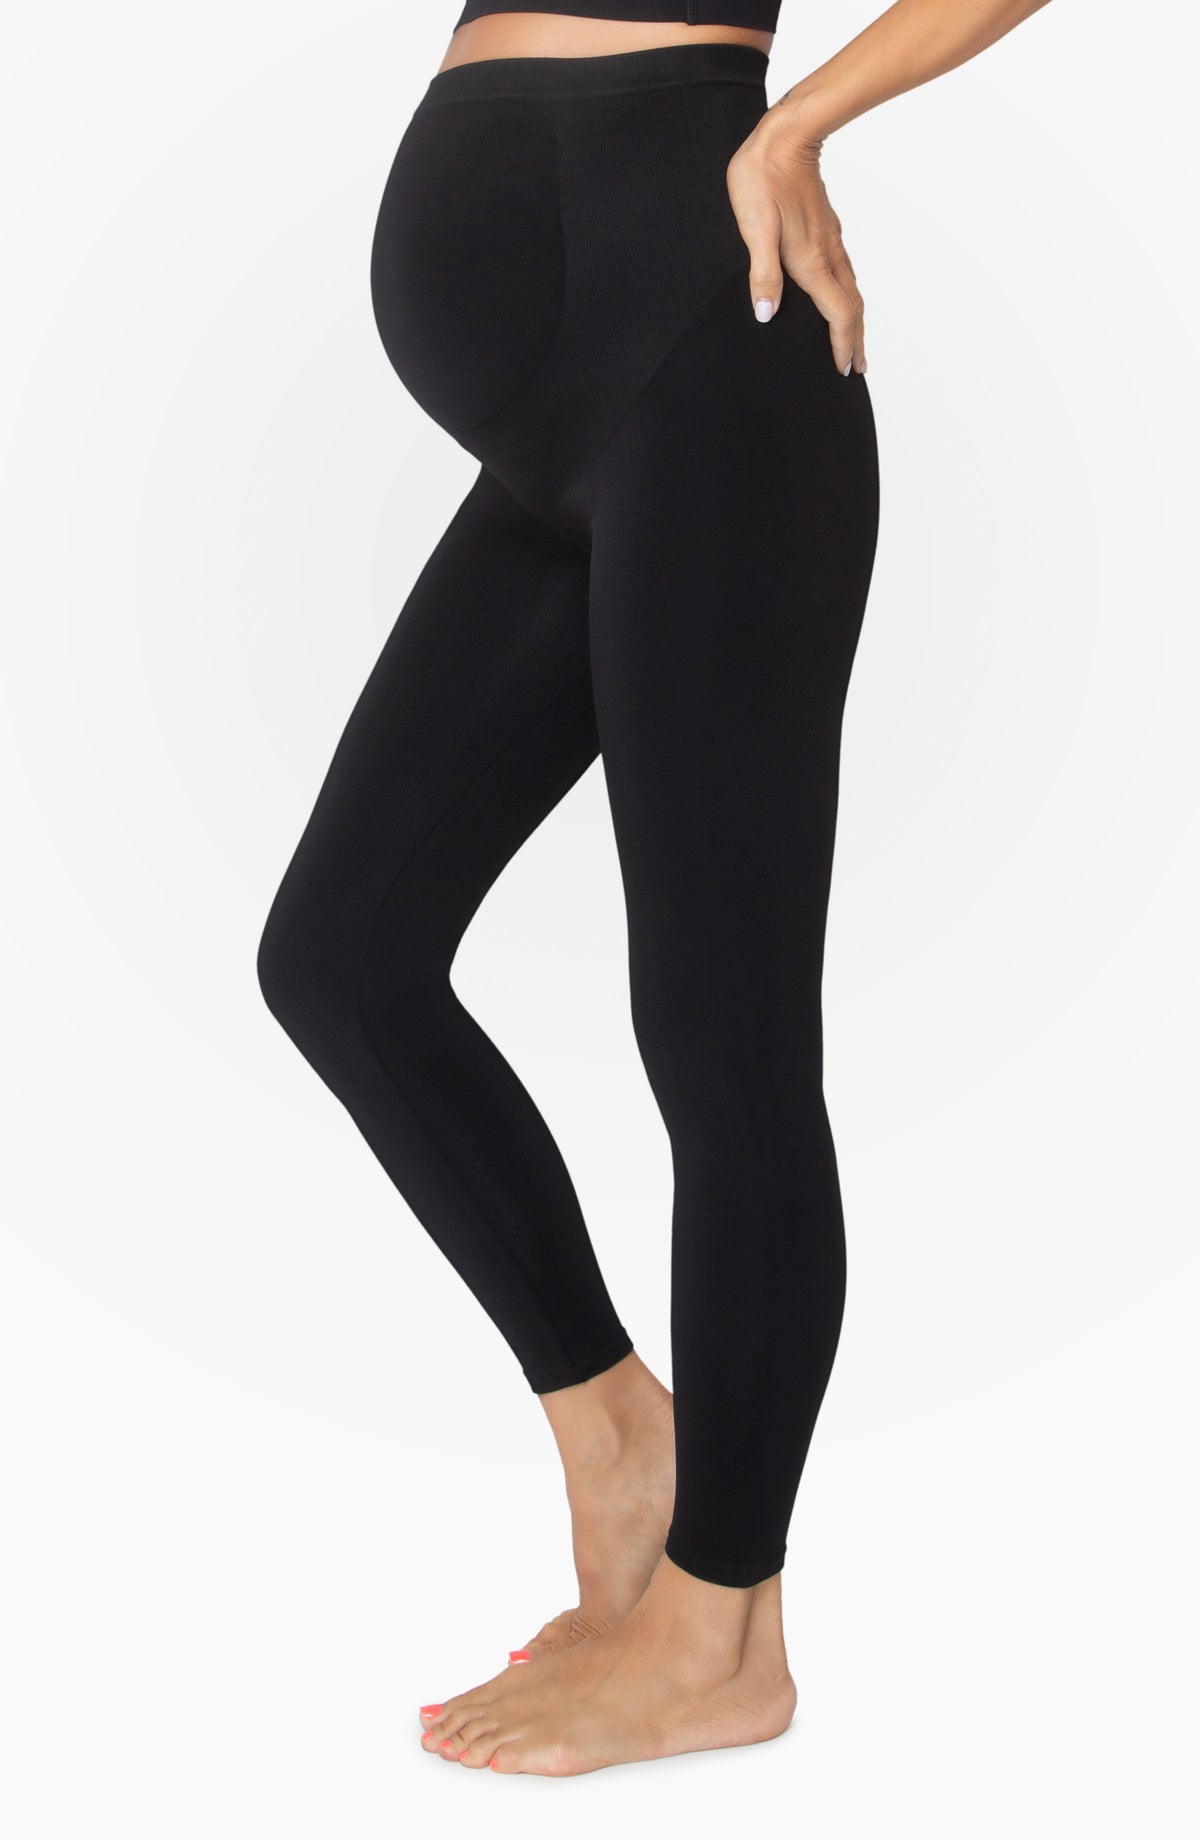 Mamalicious Maternity seamless support over the bump legging in